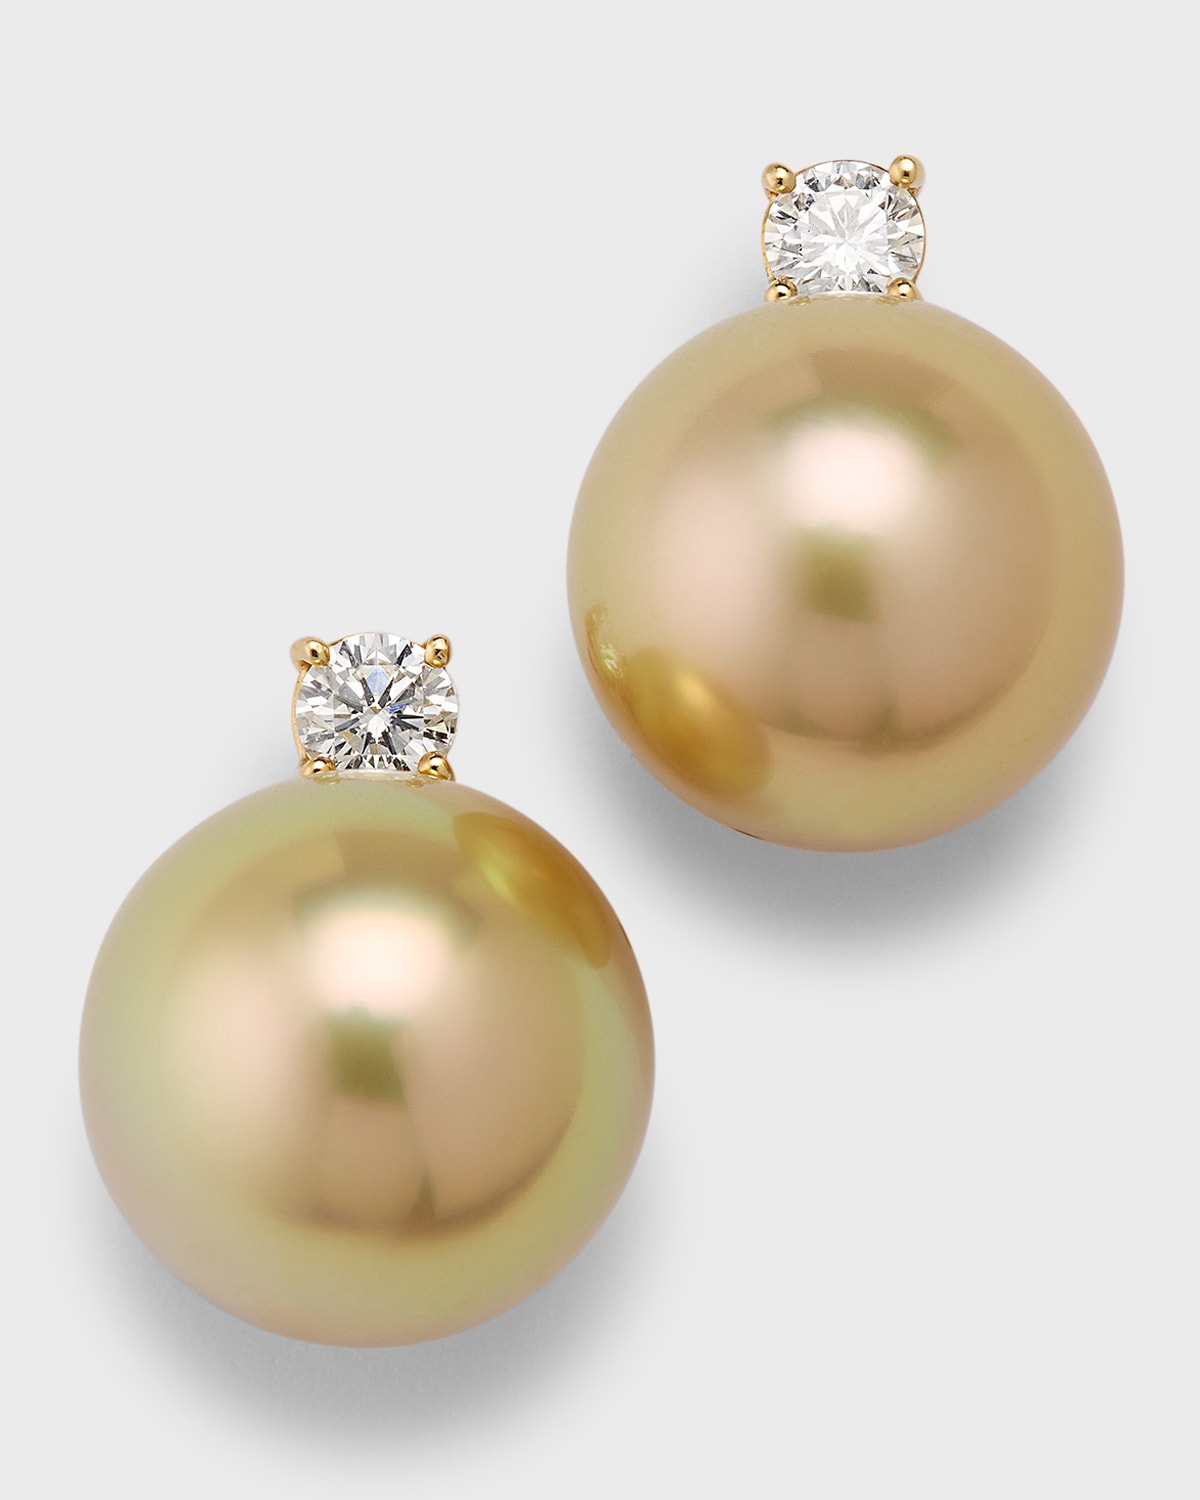 Belpearl 18k Yellow Gold Pave Diamond And Golden South Sea Pearl Earrings In Neutral